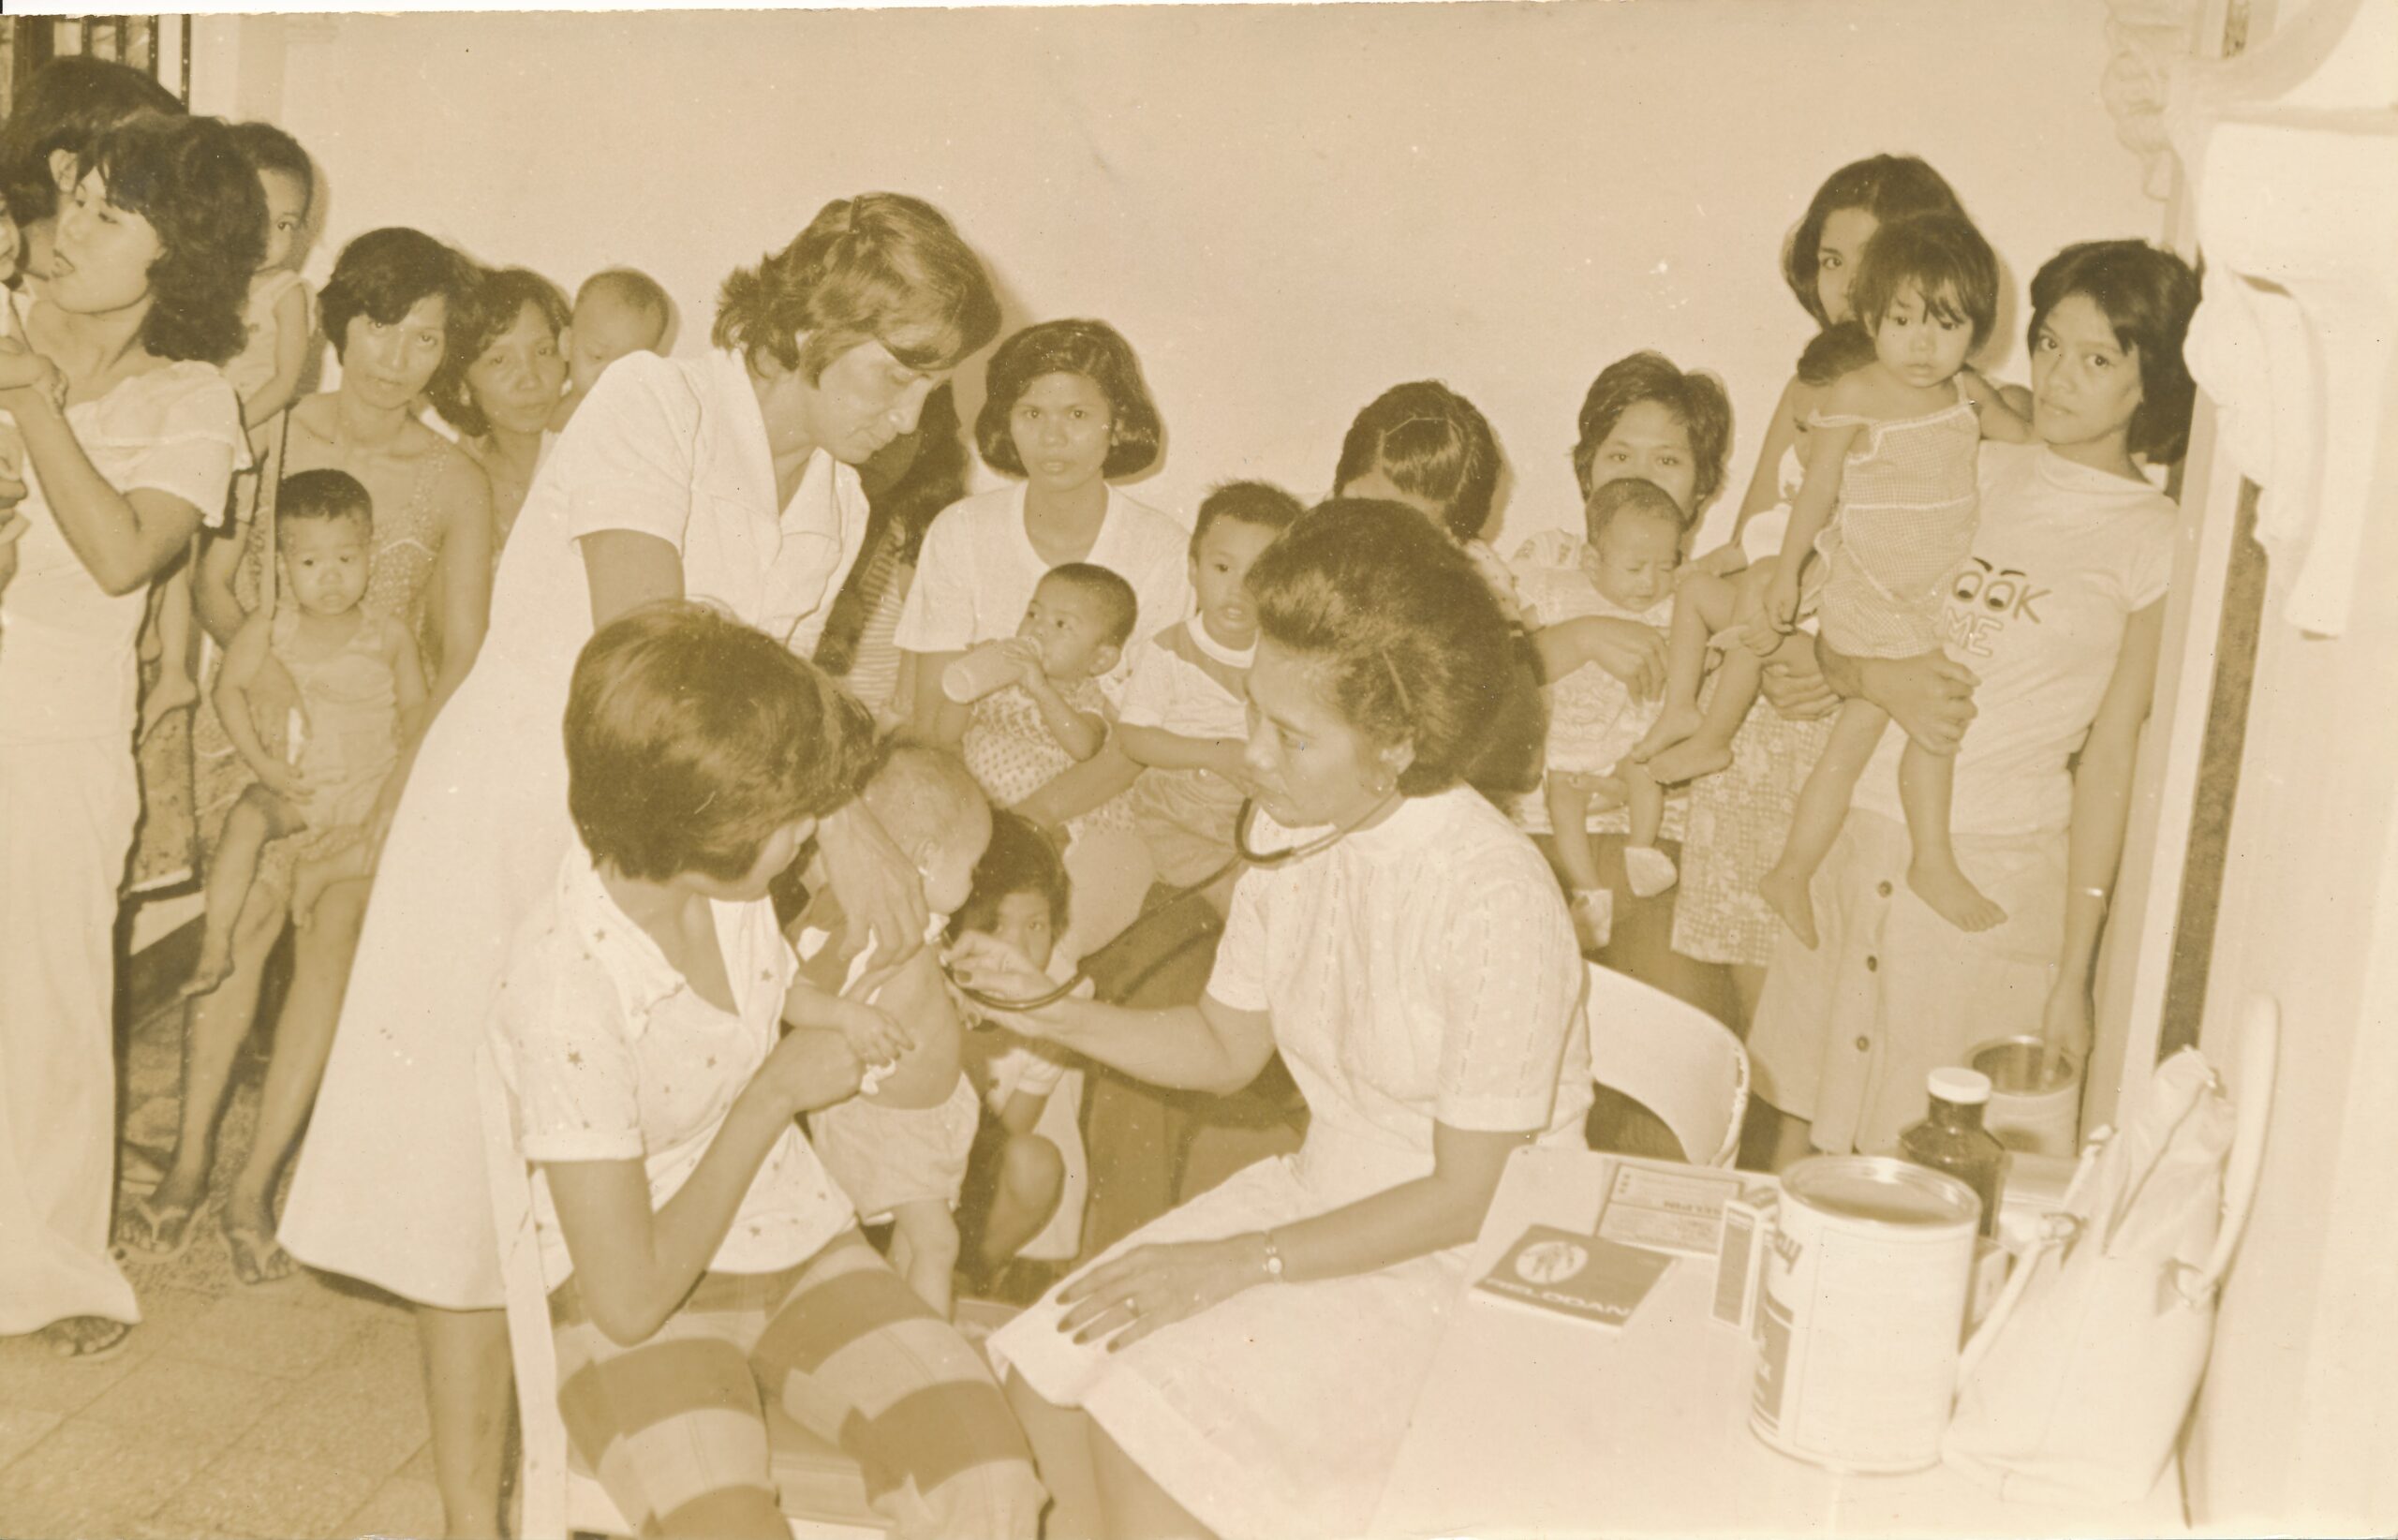 1972 Weekly Check-up of Children